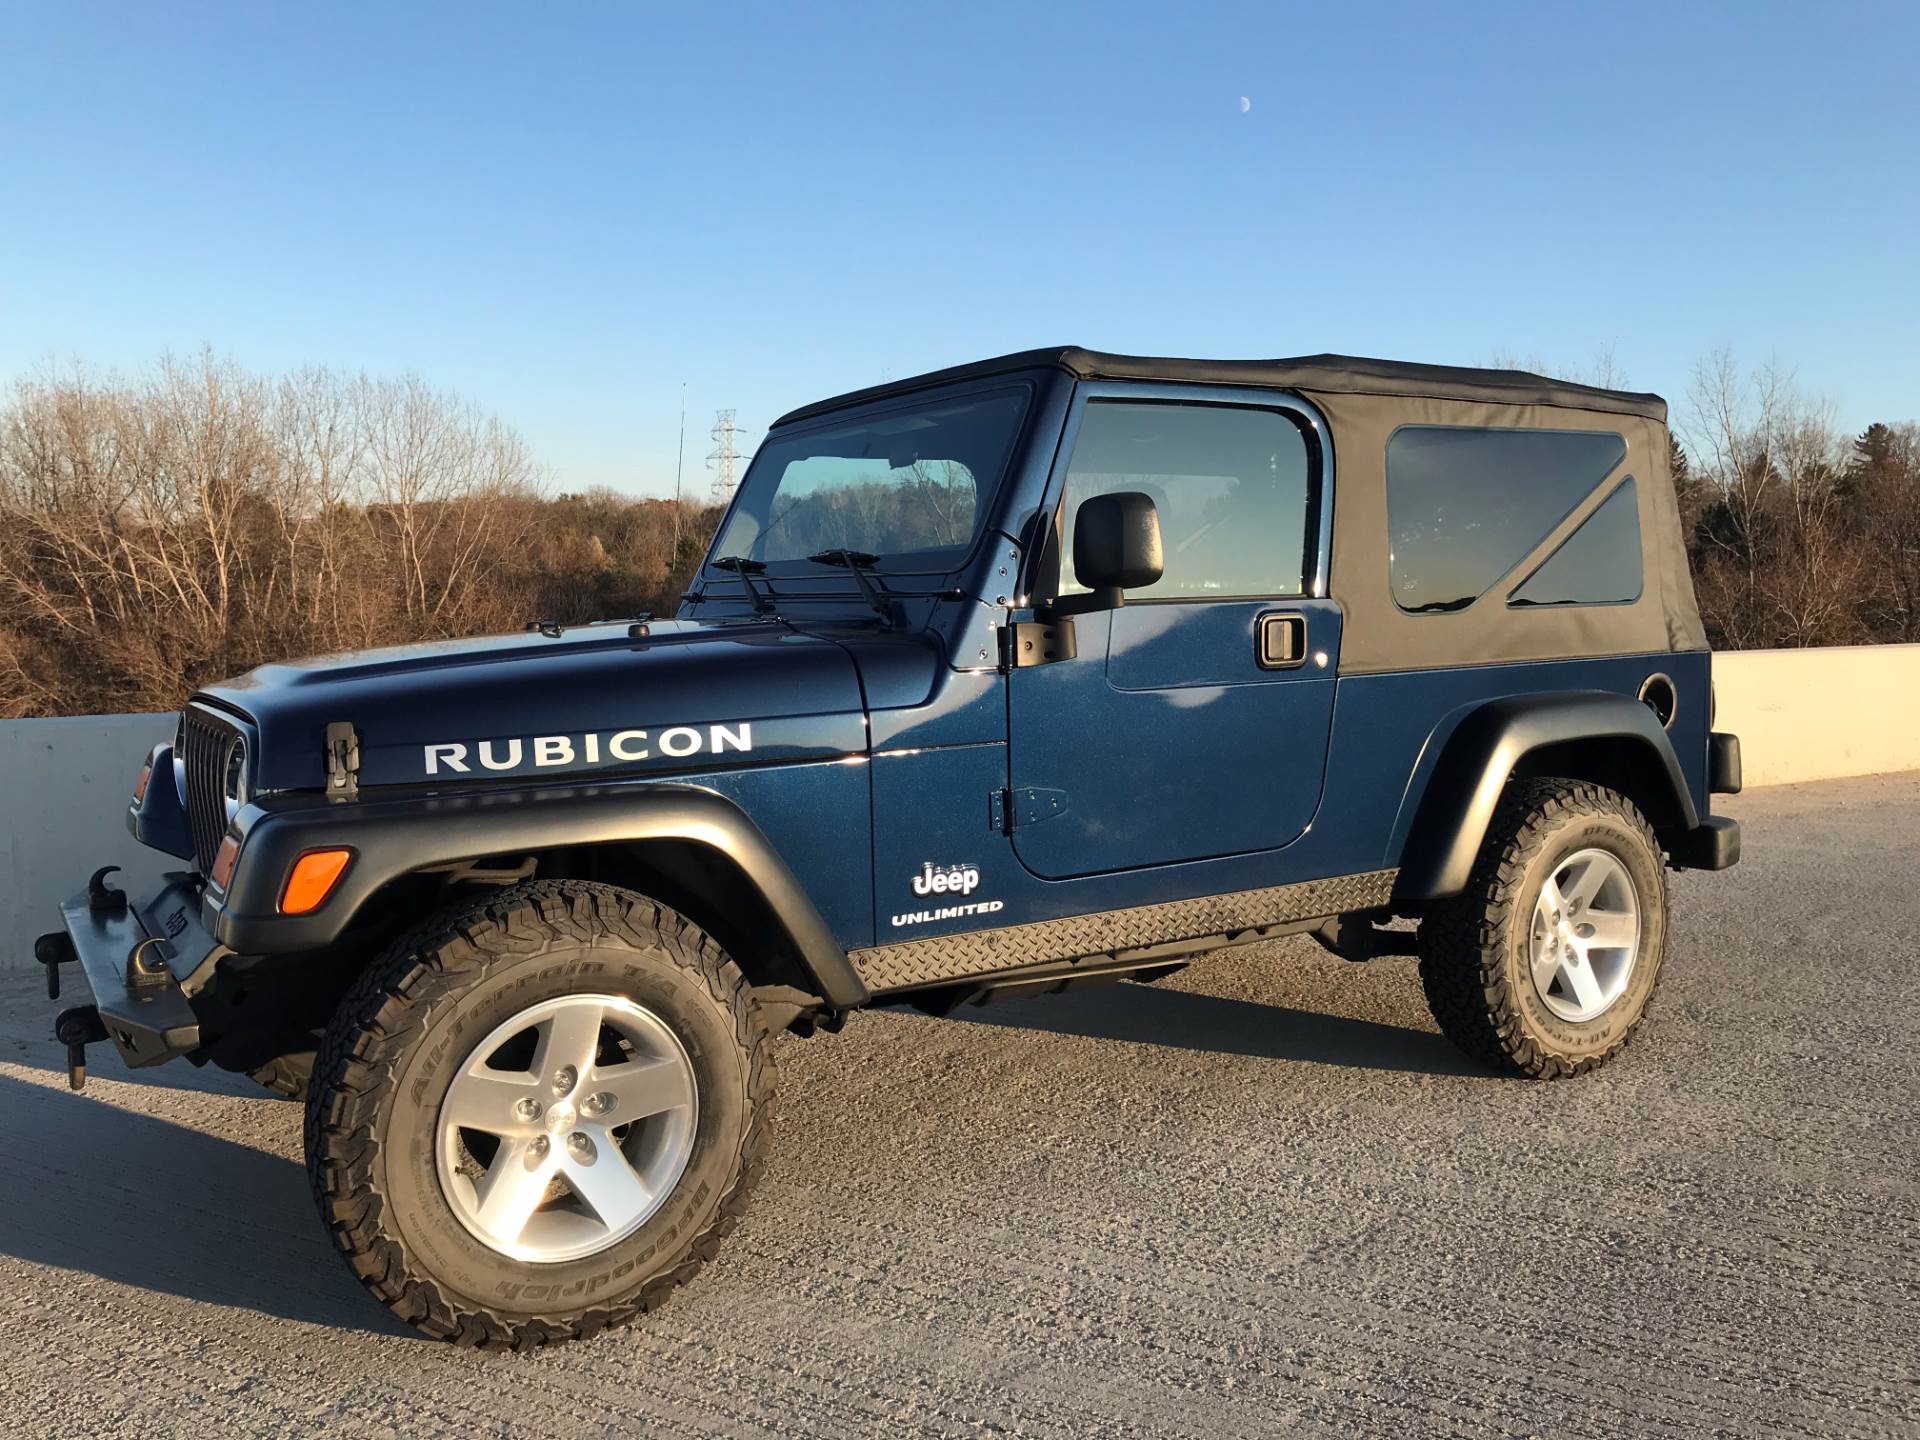 2006 Jeep Wrangler Unlimited Rubicon 2dr SUV 4WD in Big Bend, Wisconsin - Photo 105